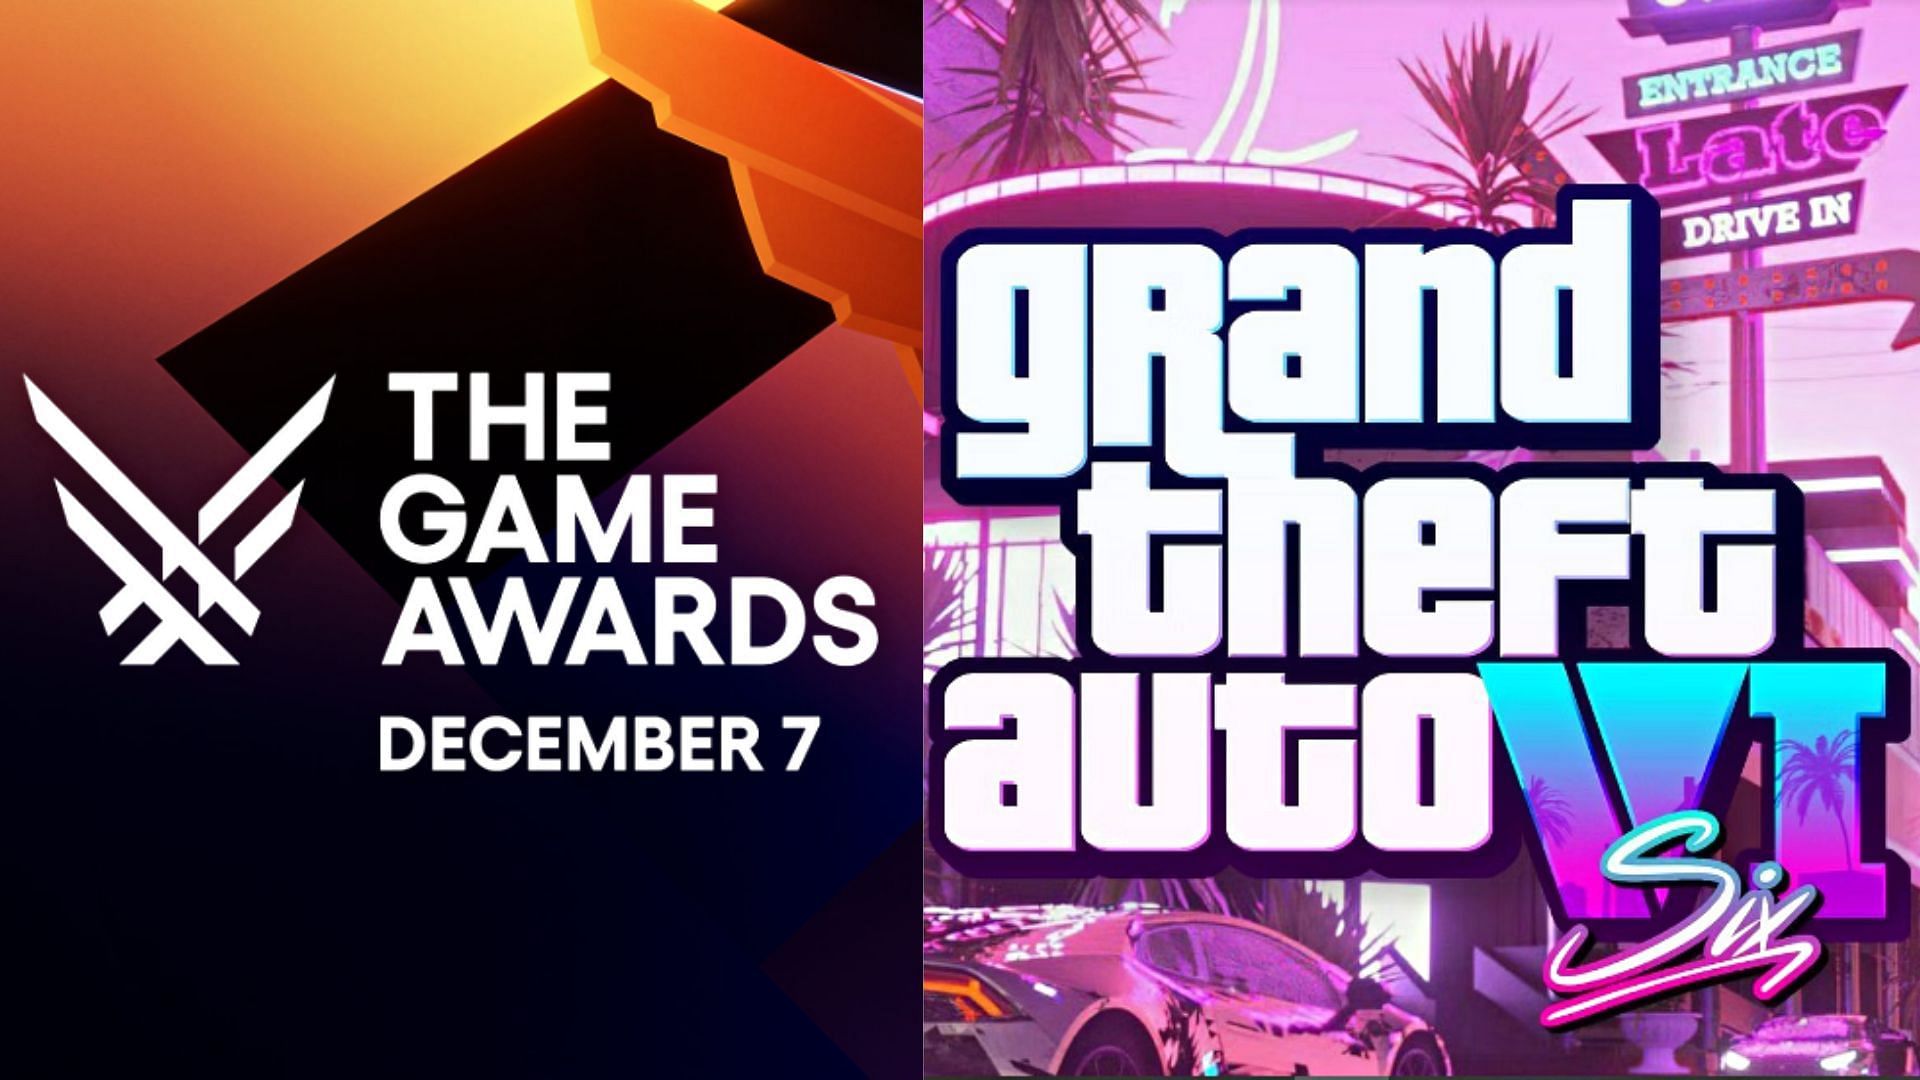 The Game Awards (@thegameawards) / X